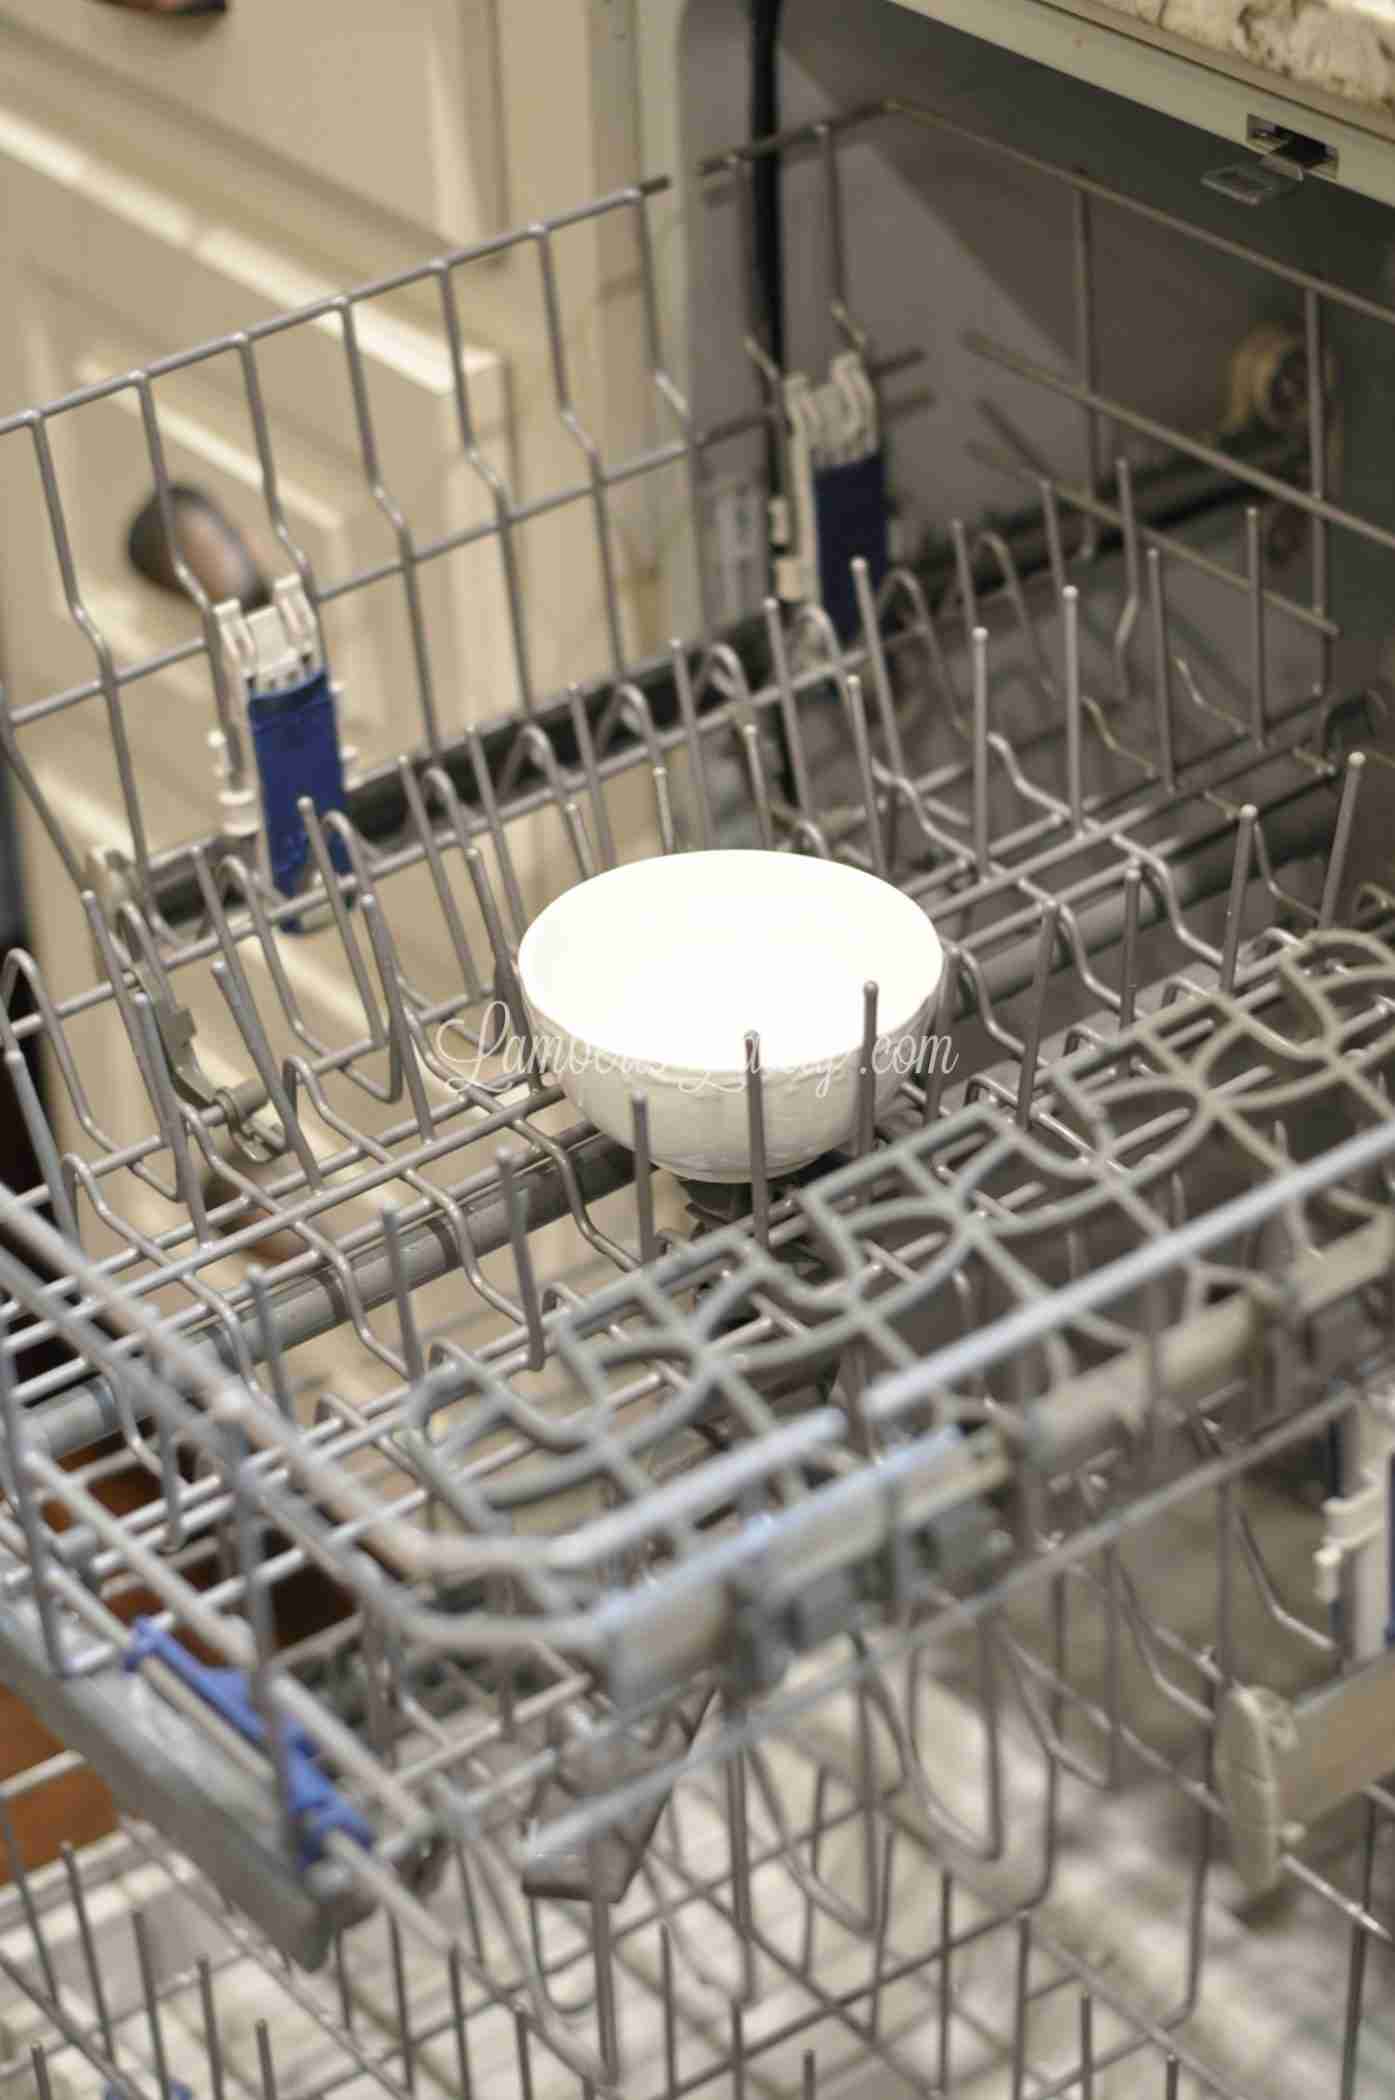 This post shows how to deep clean a dishwasher with vinegar and baking soda - see how to remove the filter and make your dishwasher so much more efficient when cleaning and drying!